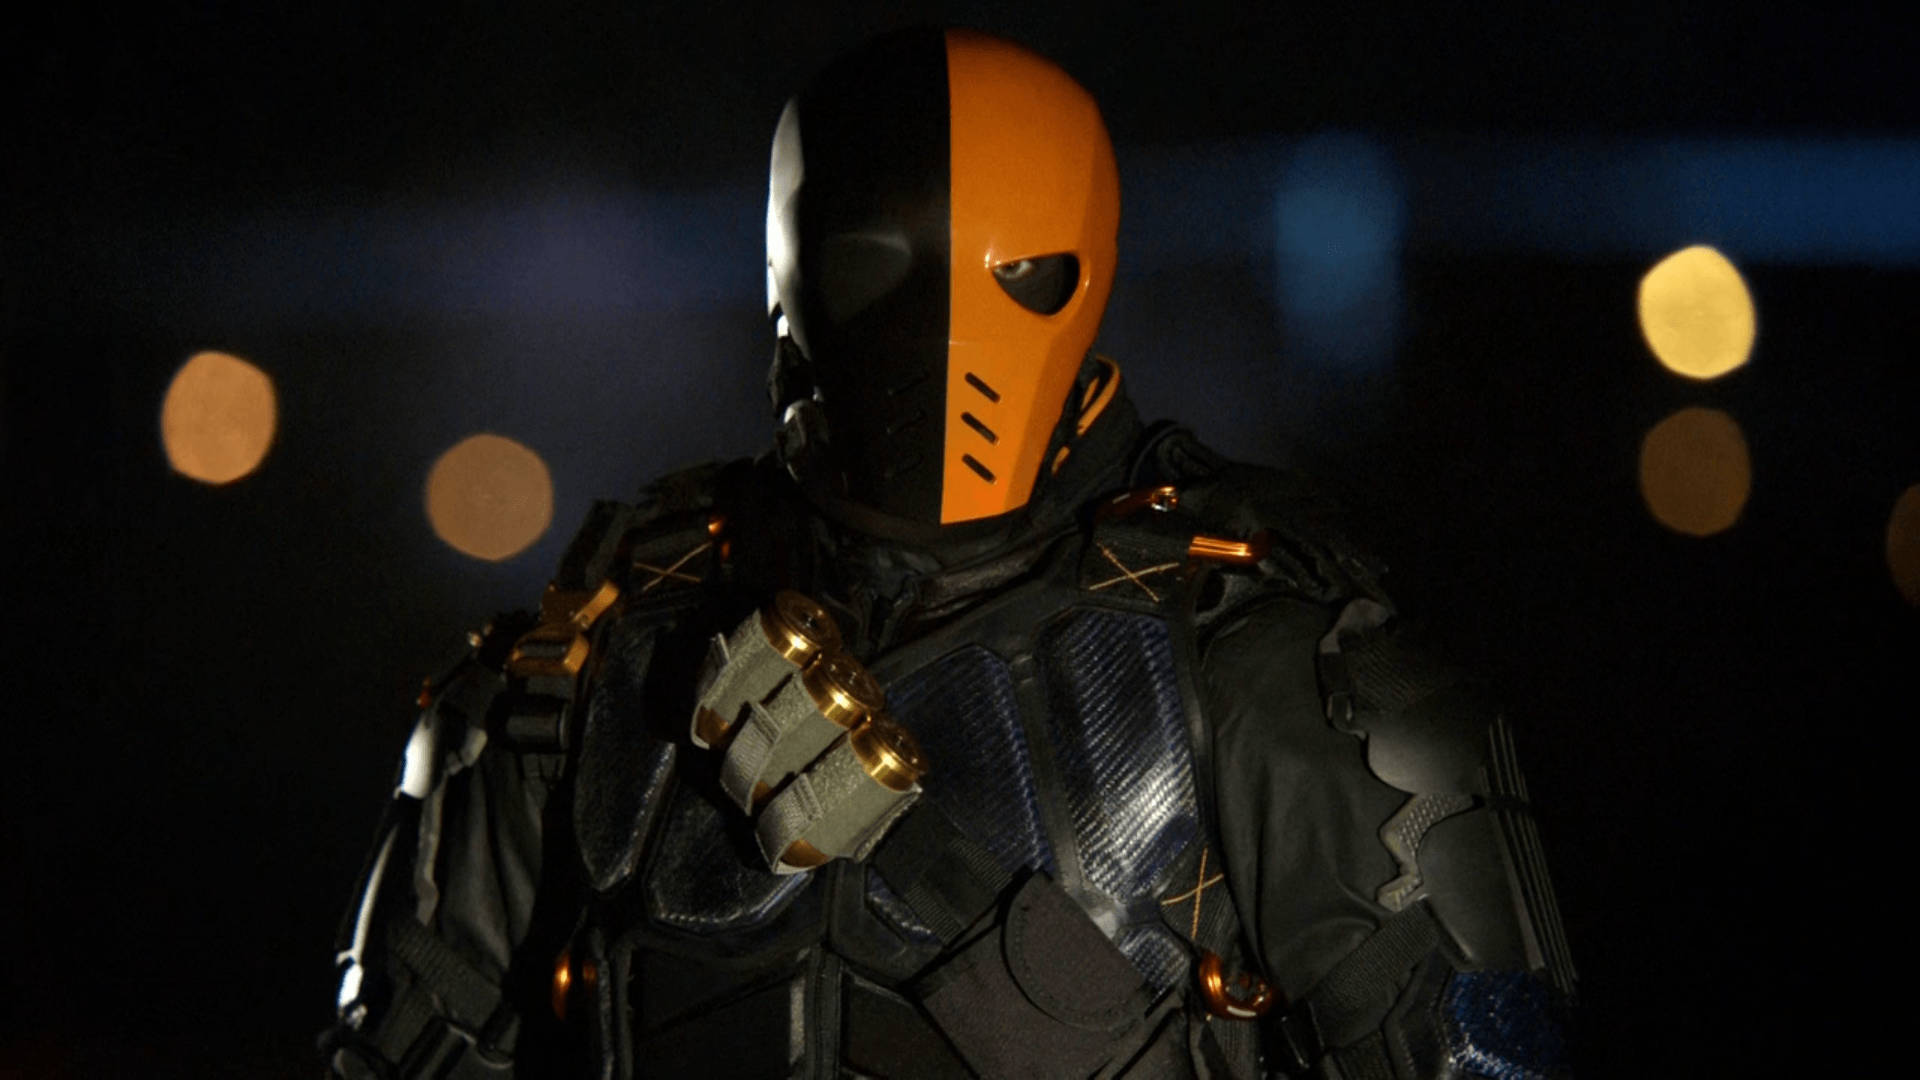 Join DC Comics villain Deathstroke in his fight against justice Wallpaper